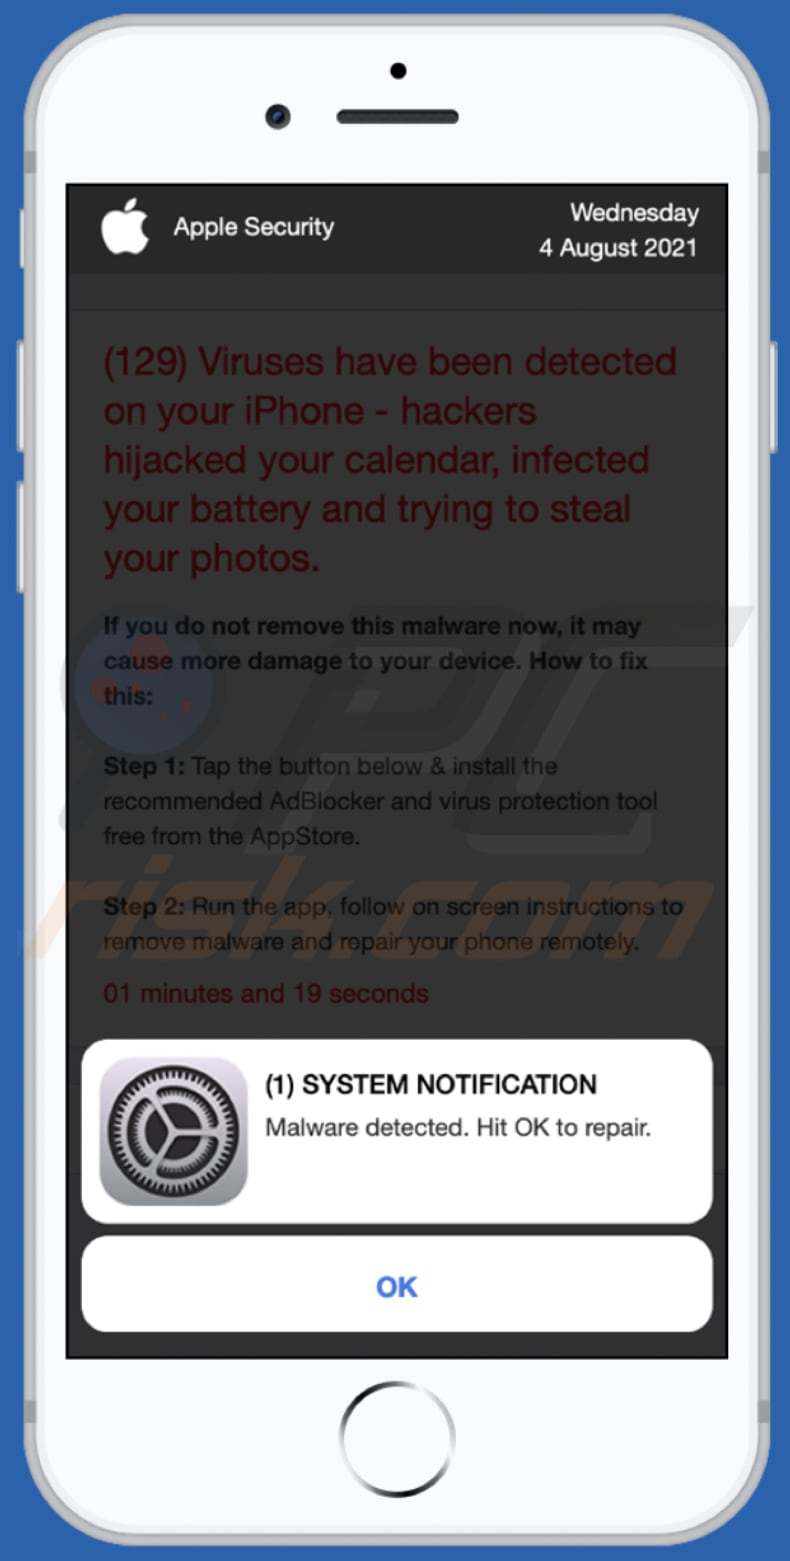 Hackers hijacked your calendar, infected your battery truffa